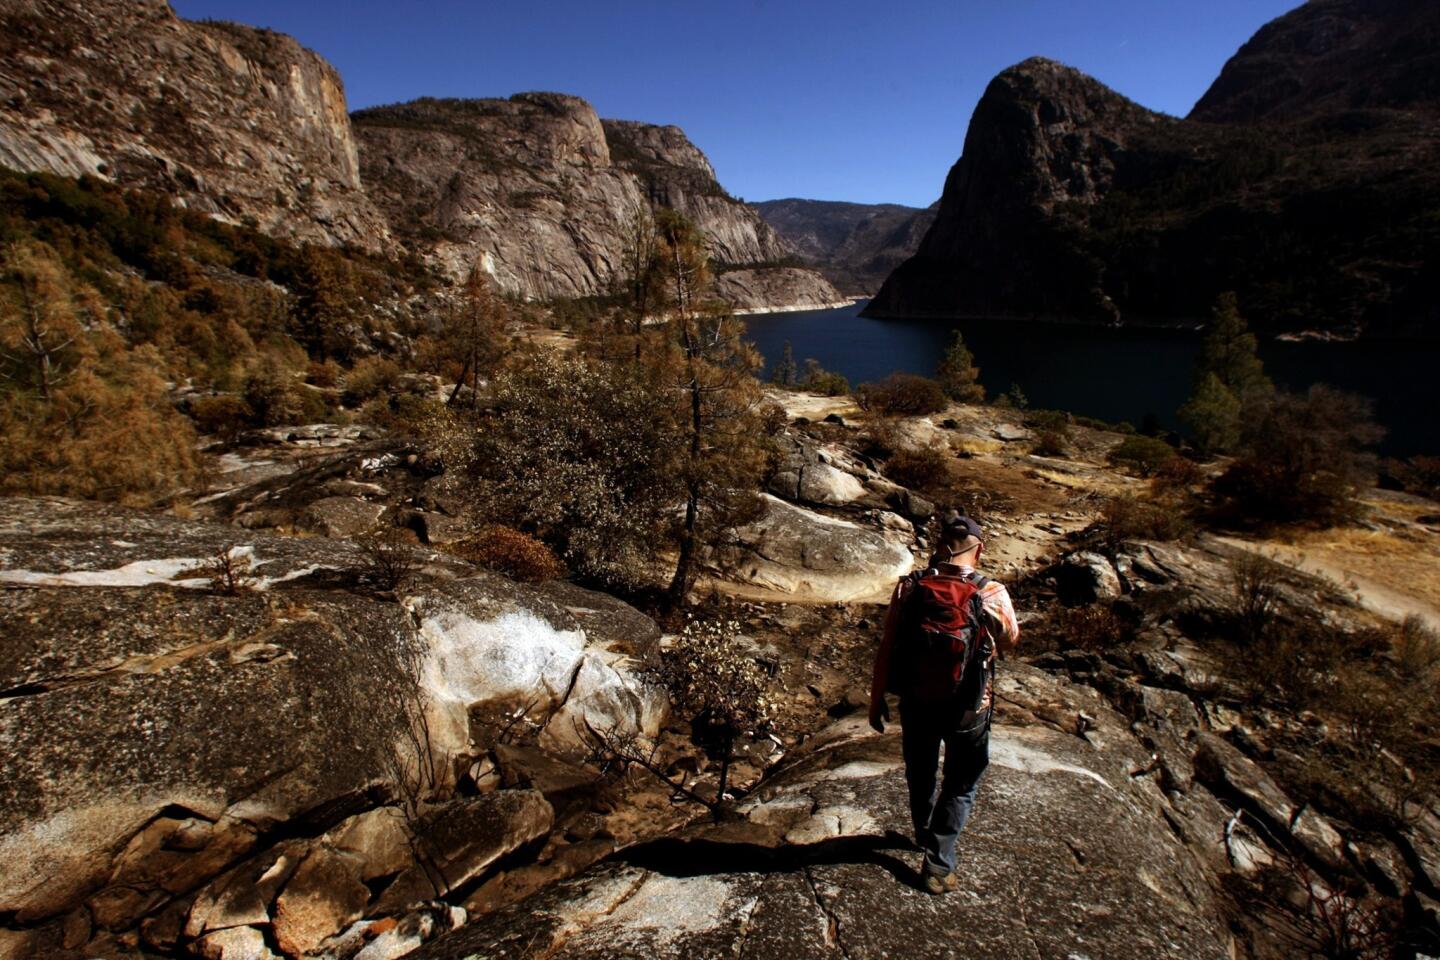 William Sears, a science and policy analyst with the Hetch Hetchy Regional Water System, walks along the Hetch Hetchy Reservoir. San Francisco officials are closely monitoring hydroelectric facilities, soil conditions and water quality in and around reservoir, where the Rim fire crept around the edges of the city's drinking water supply and made some areas more prone to erosion.